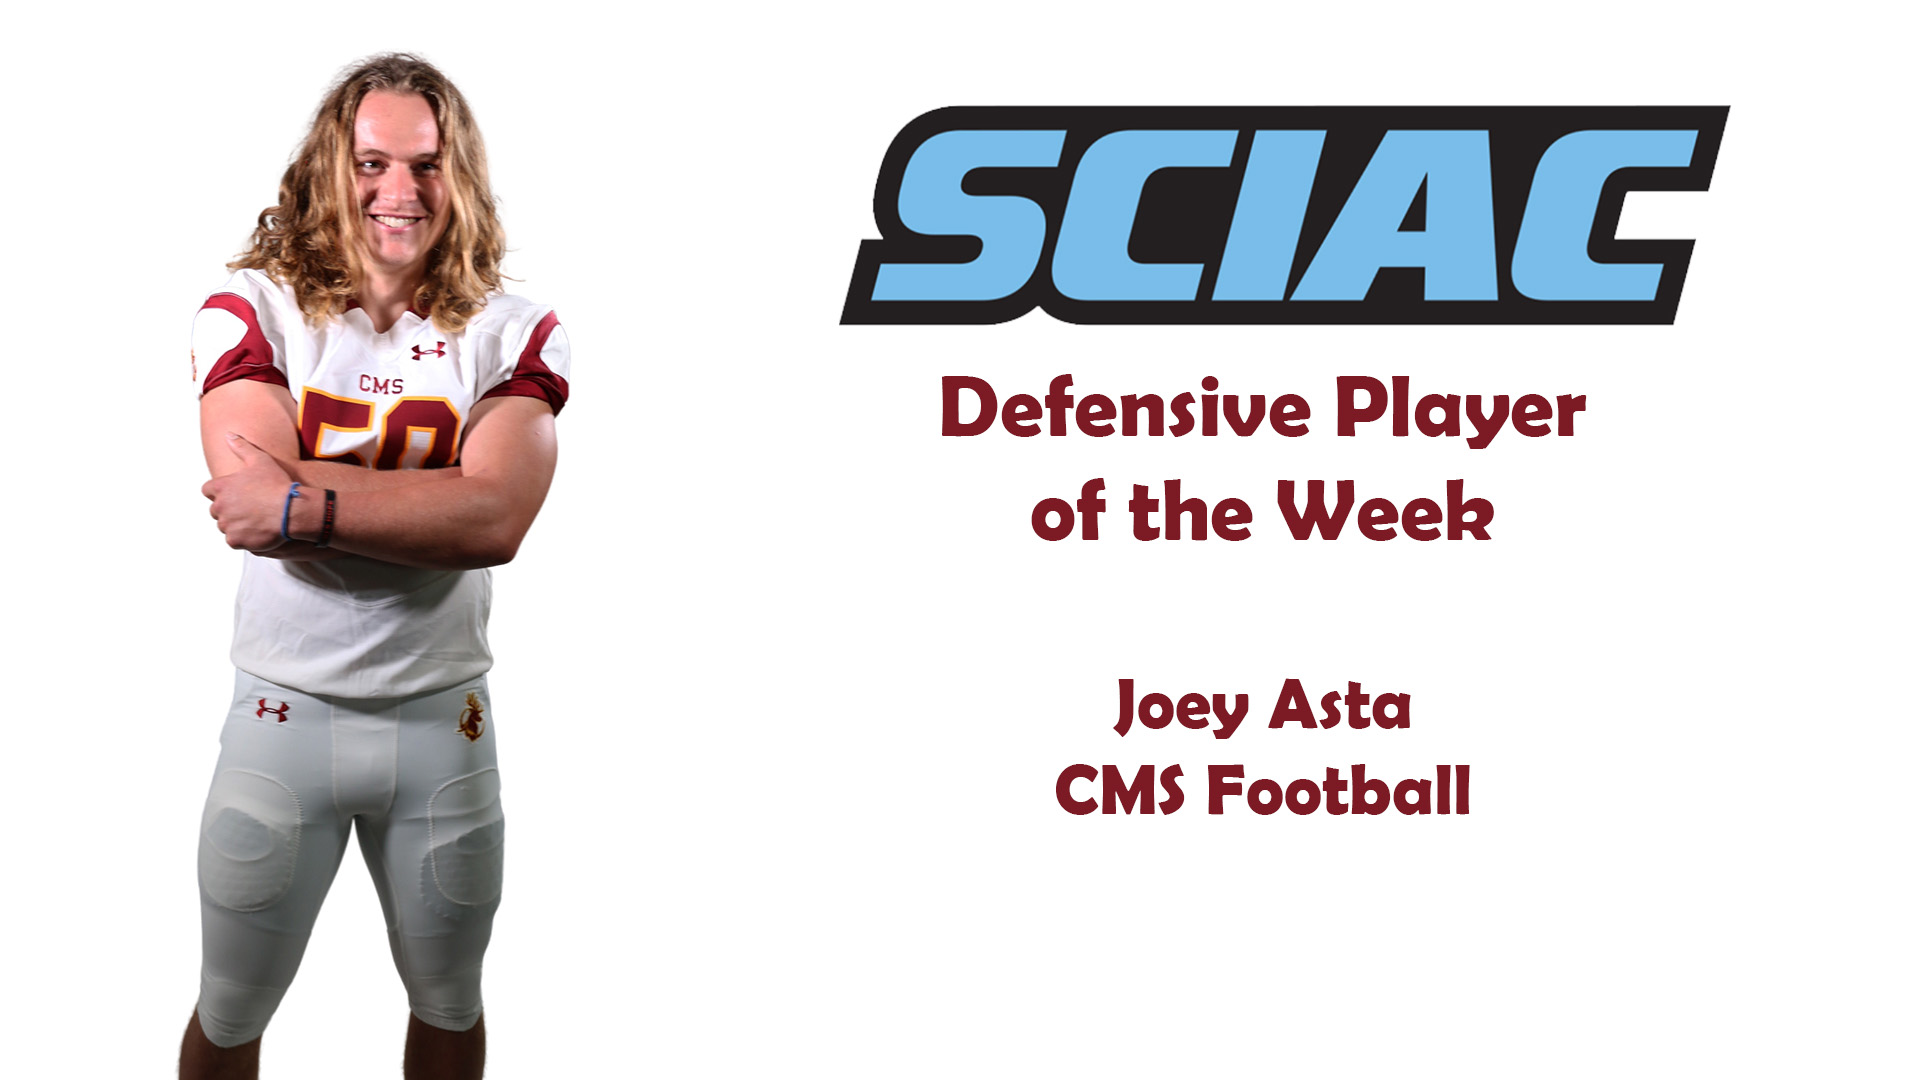 Posed shot of Joey Asta with the SCIAC logo